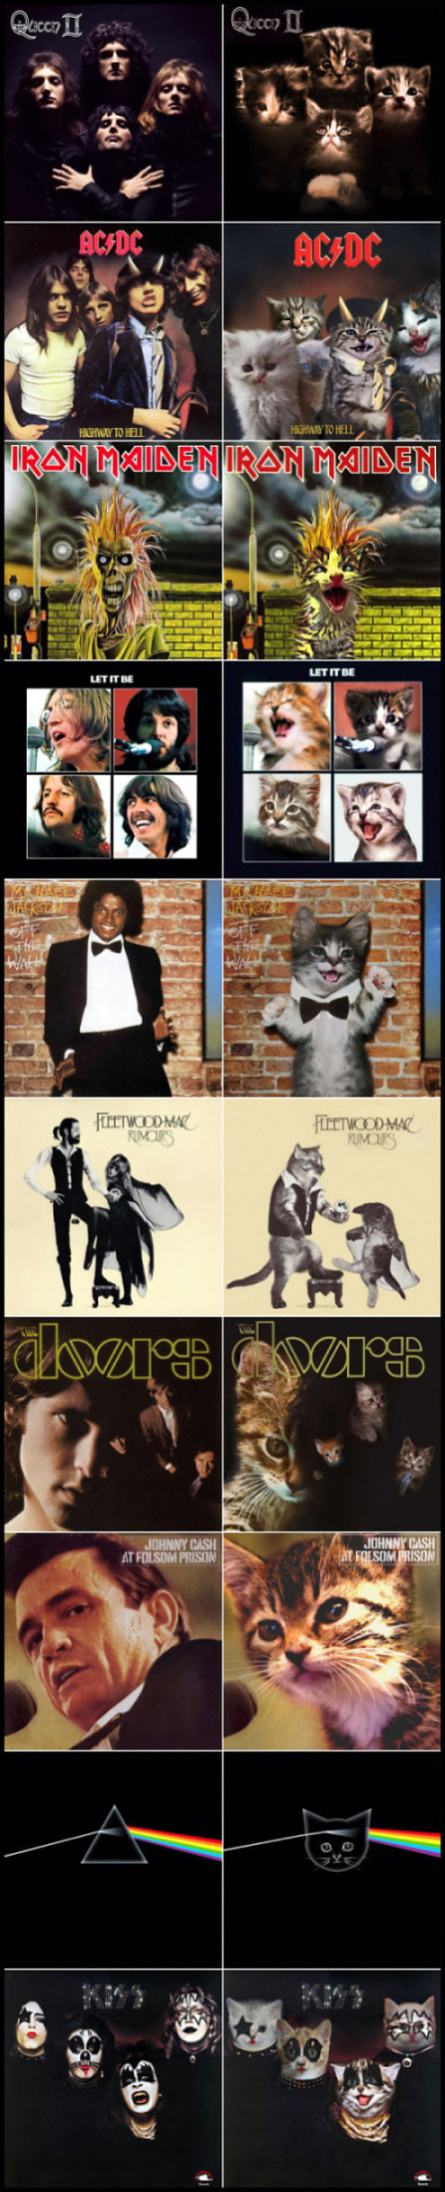 Obrázek - 10 classic album covers recreated with kittens -      13.02.2013